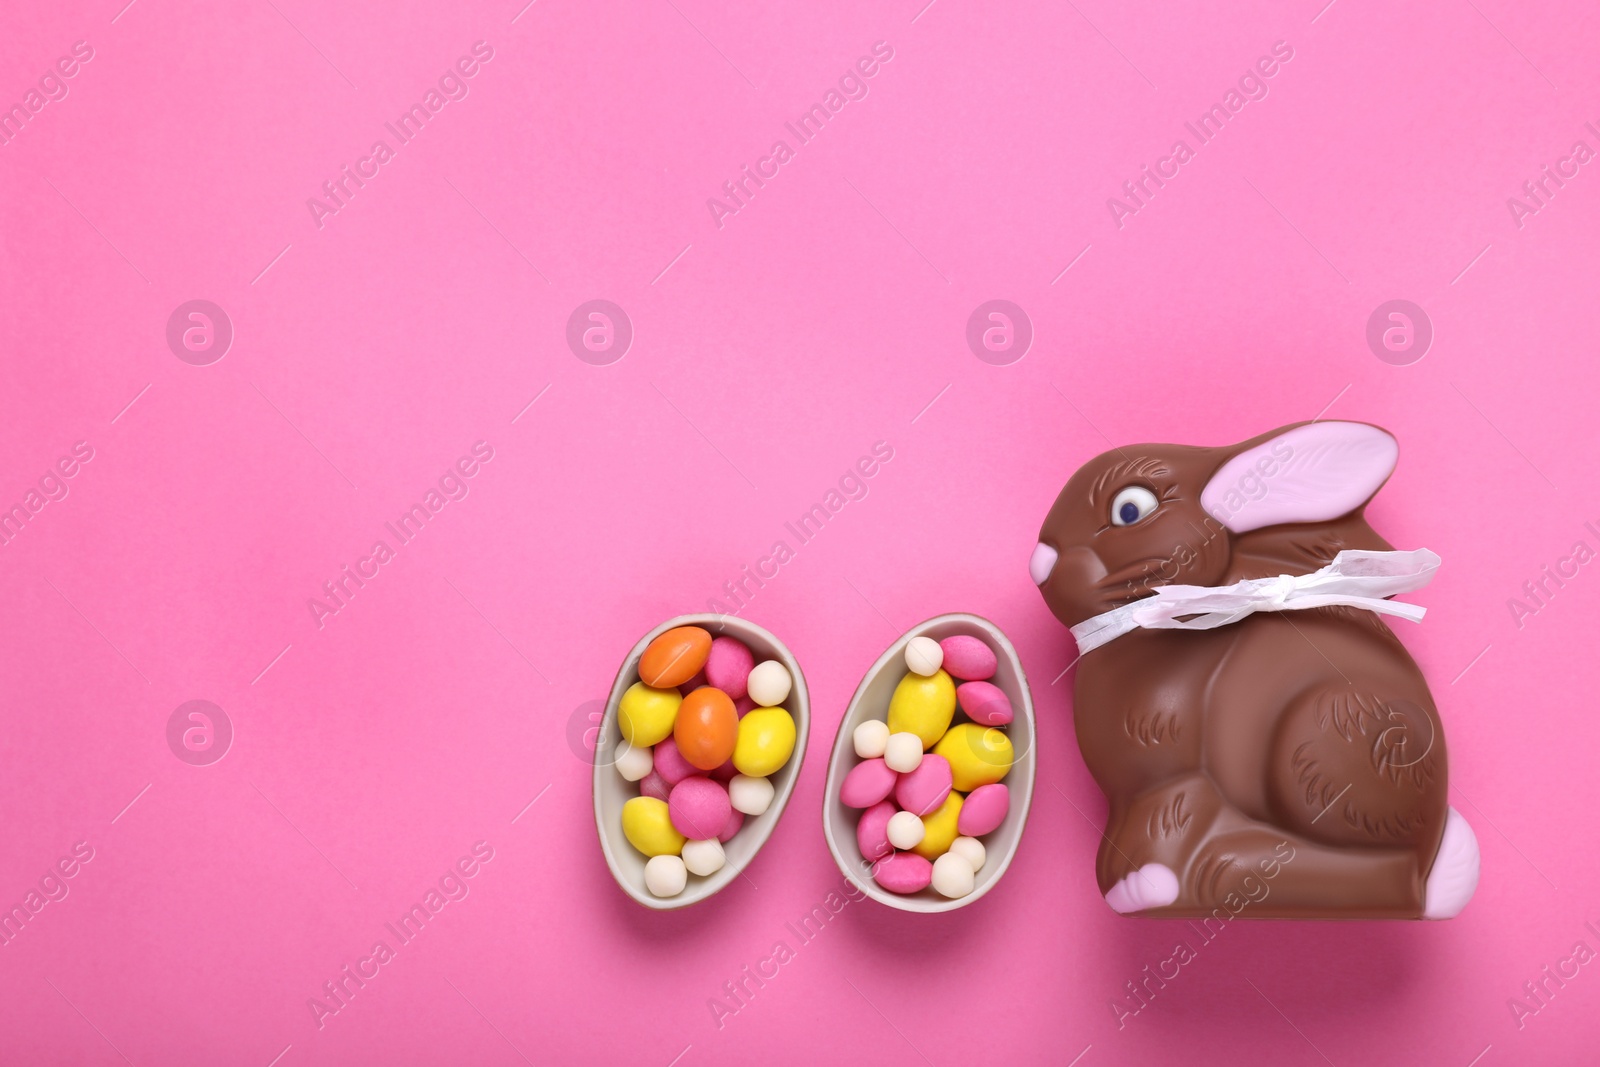 Photo of Chocolate Easter bunny, halves of egg and candies on pink background, flat lay. Space for text